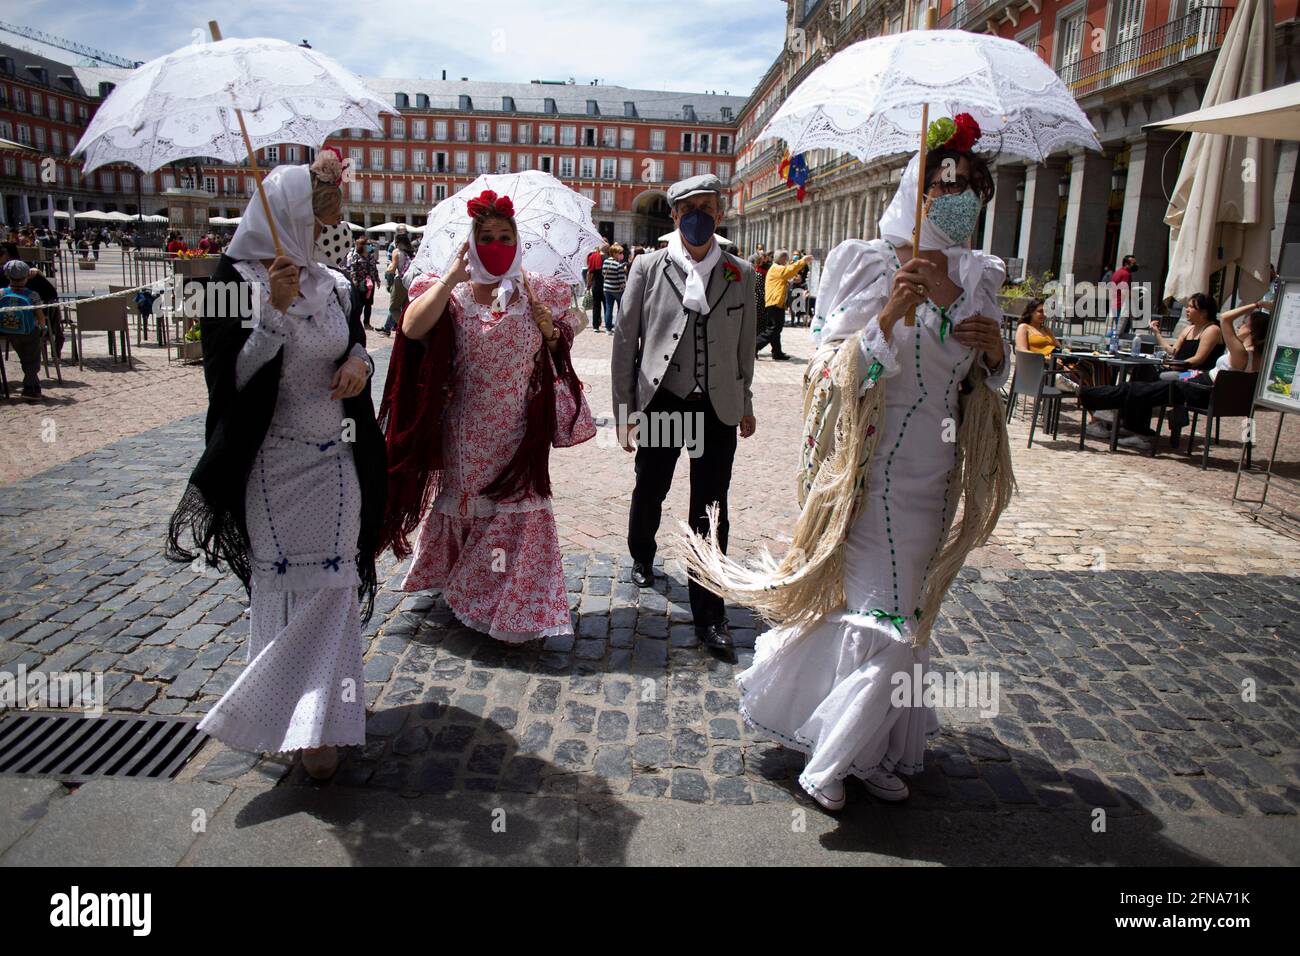 Madrid, Spain. 15th May, 2021. A group of friends dressed in traditional "Chulapo" and "Chulapa" costumes walk through the Plaza Mayor in Madrid during the celebrations of the day of the patron saint of Madrid, San Isidro Labrador. Credit: SOPA Images Limited/Alamy Live News Stock Photo